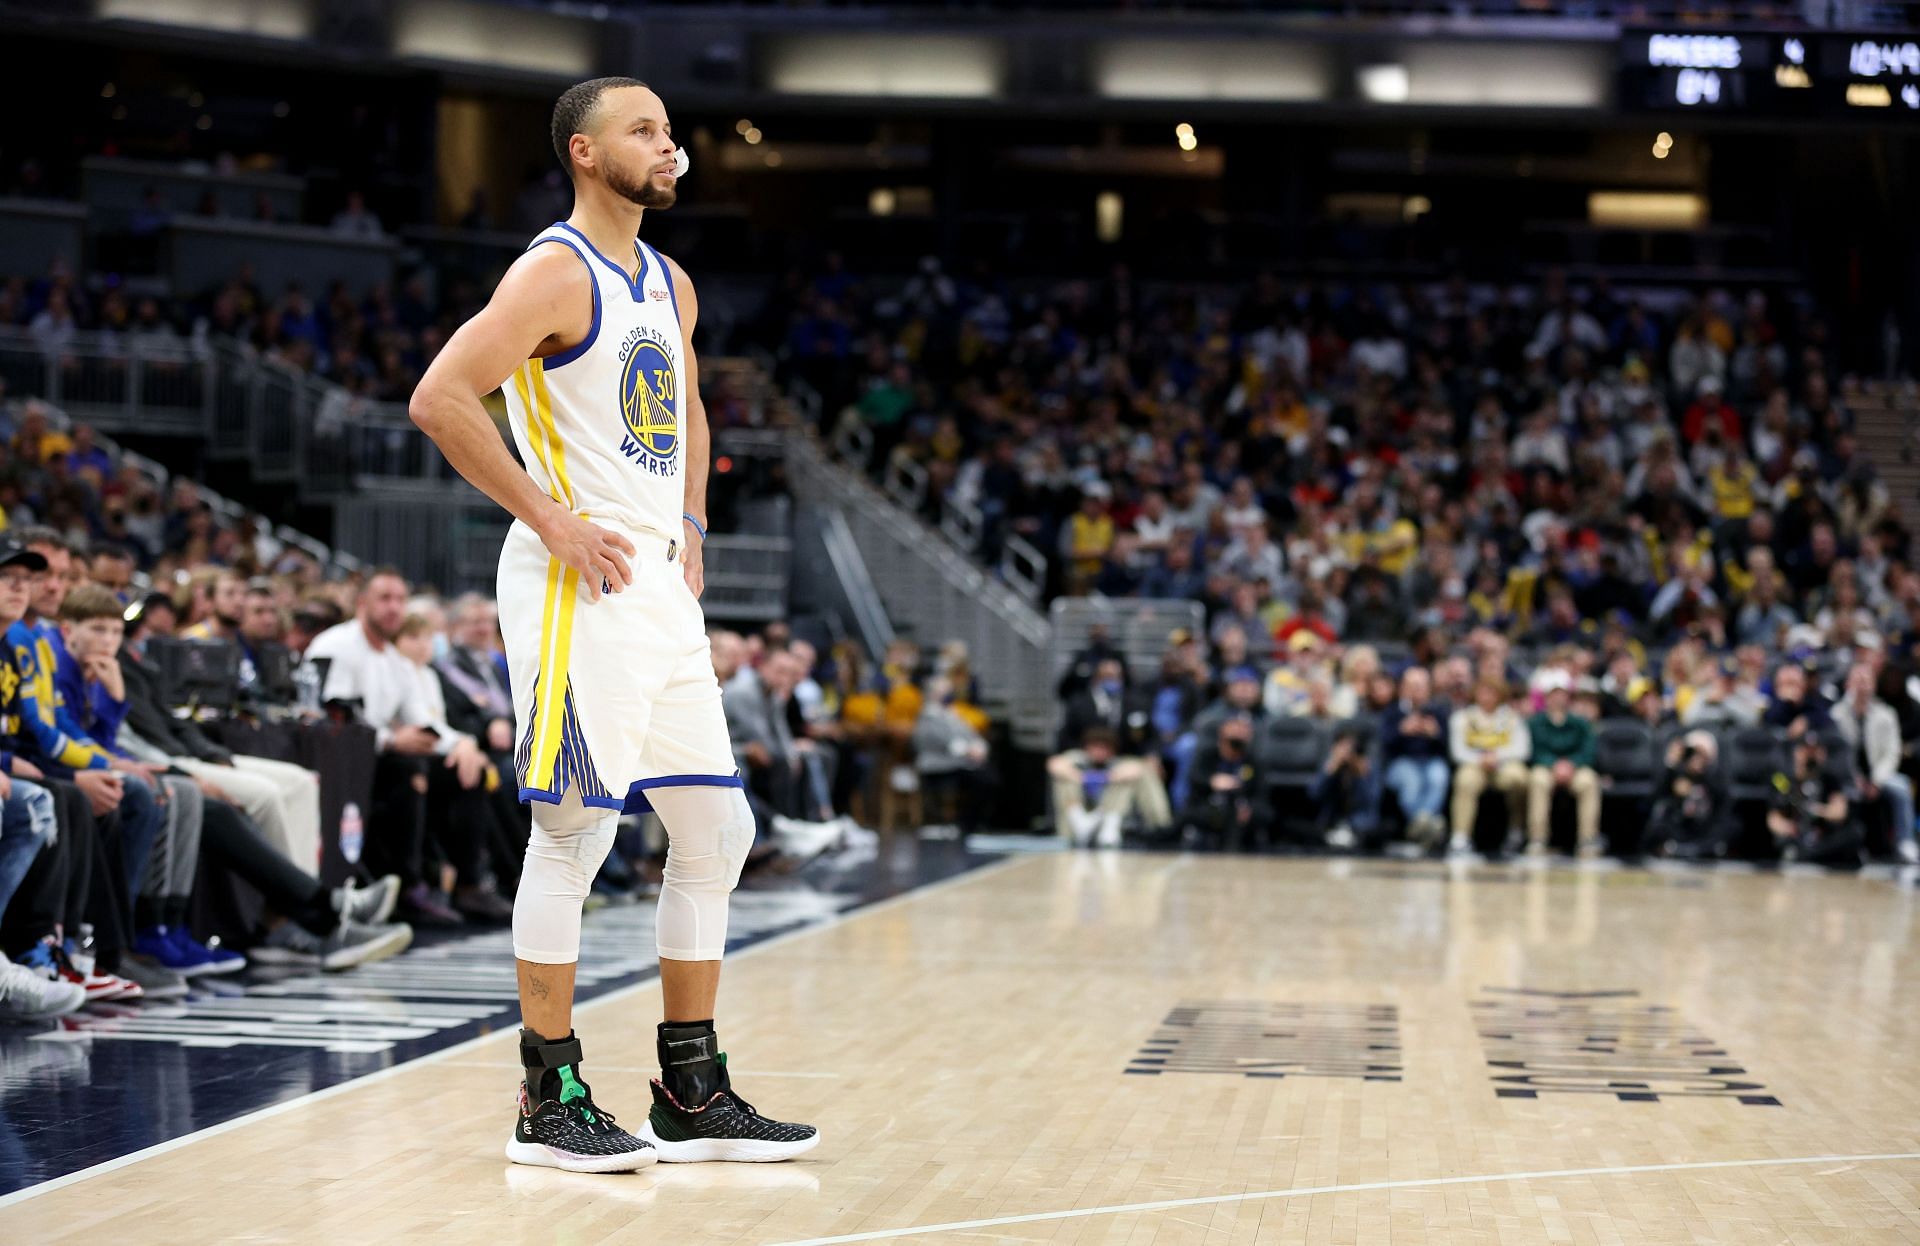 Steph Curry of the Golden State Warriors against the Indiana Pacers